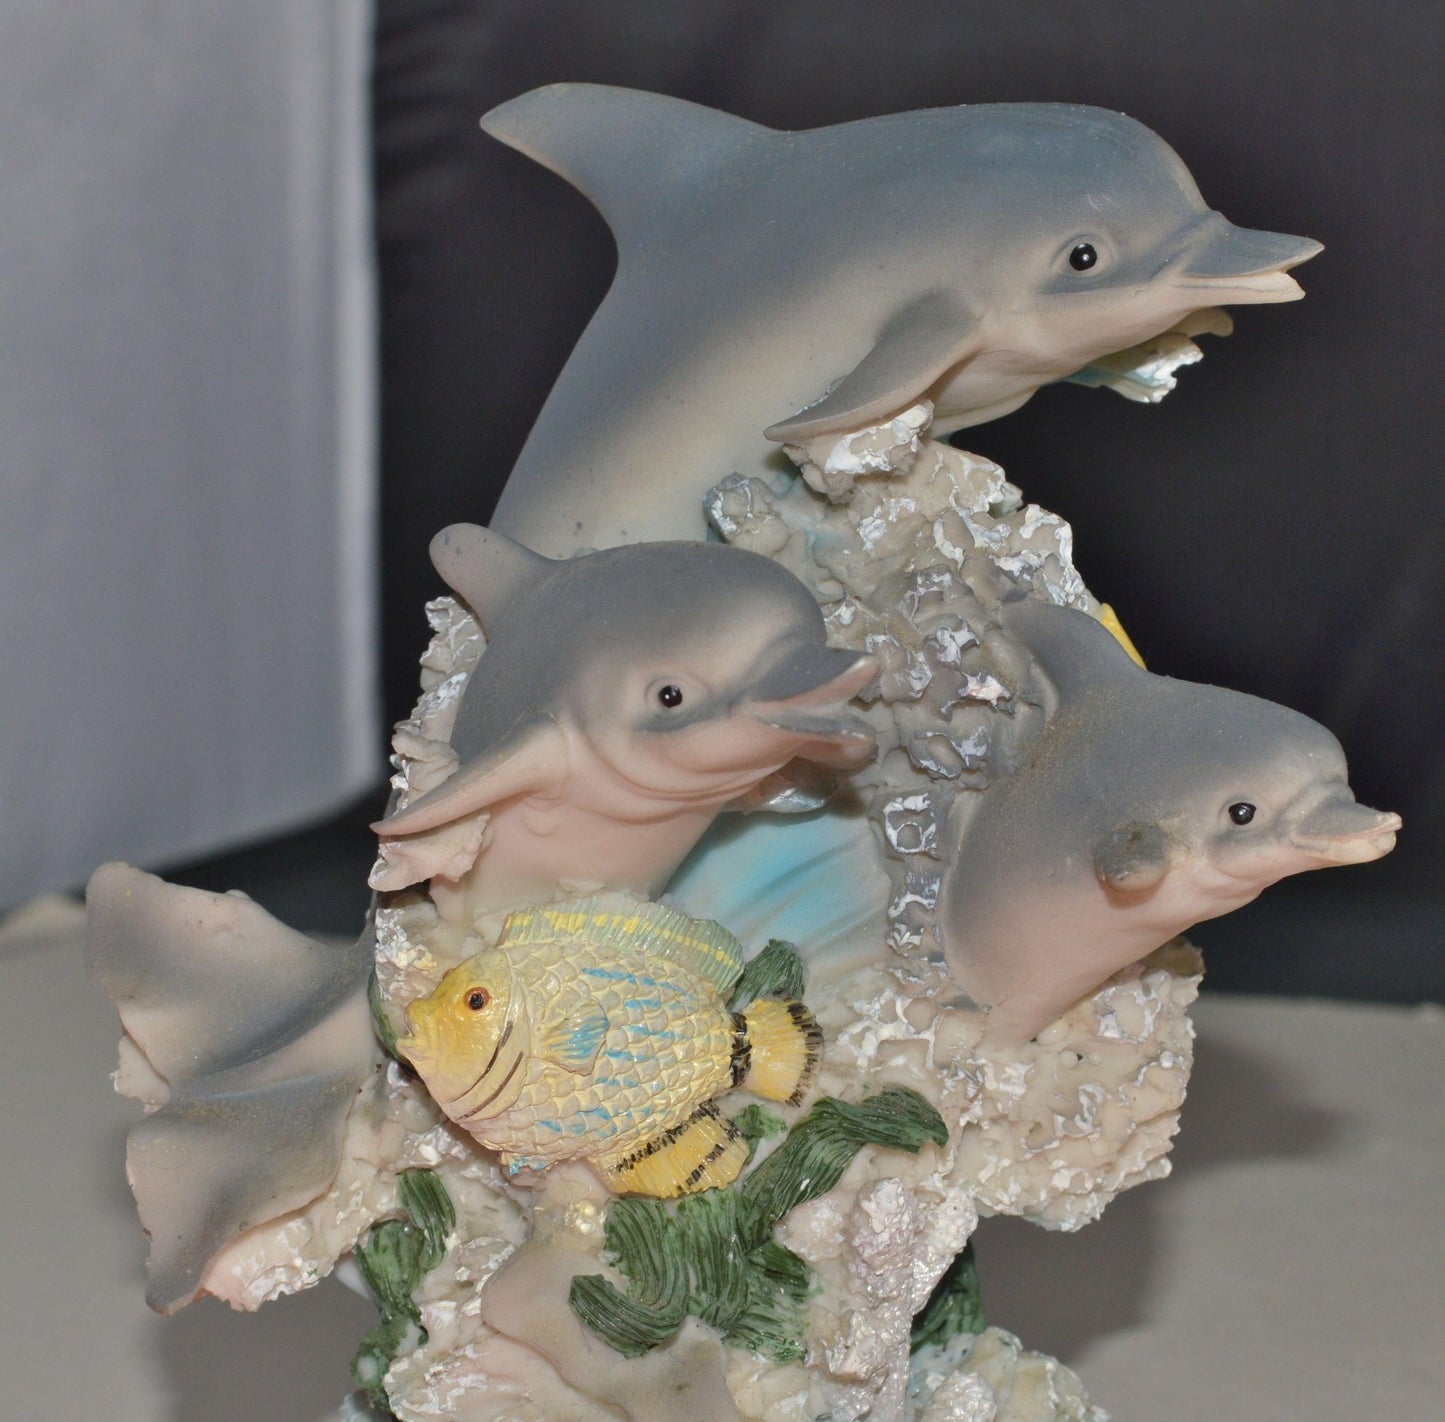 DECORATIVE ORNAMENT DOLPHINS ON A WOODEN BASE(PREVIOUSLY OWNED) GOOD CONDITION - TMD167207